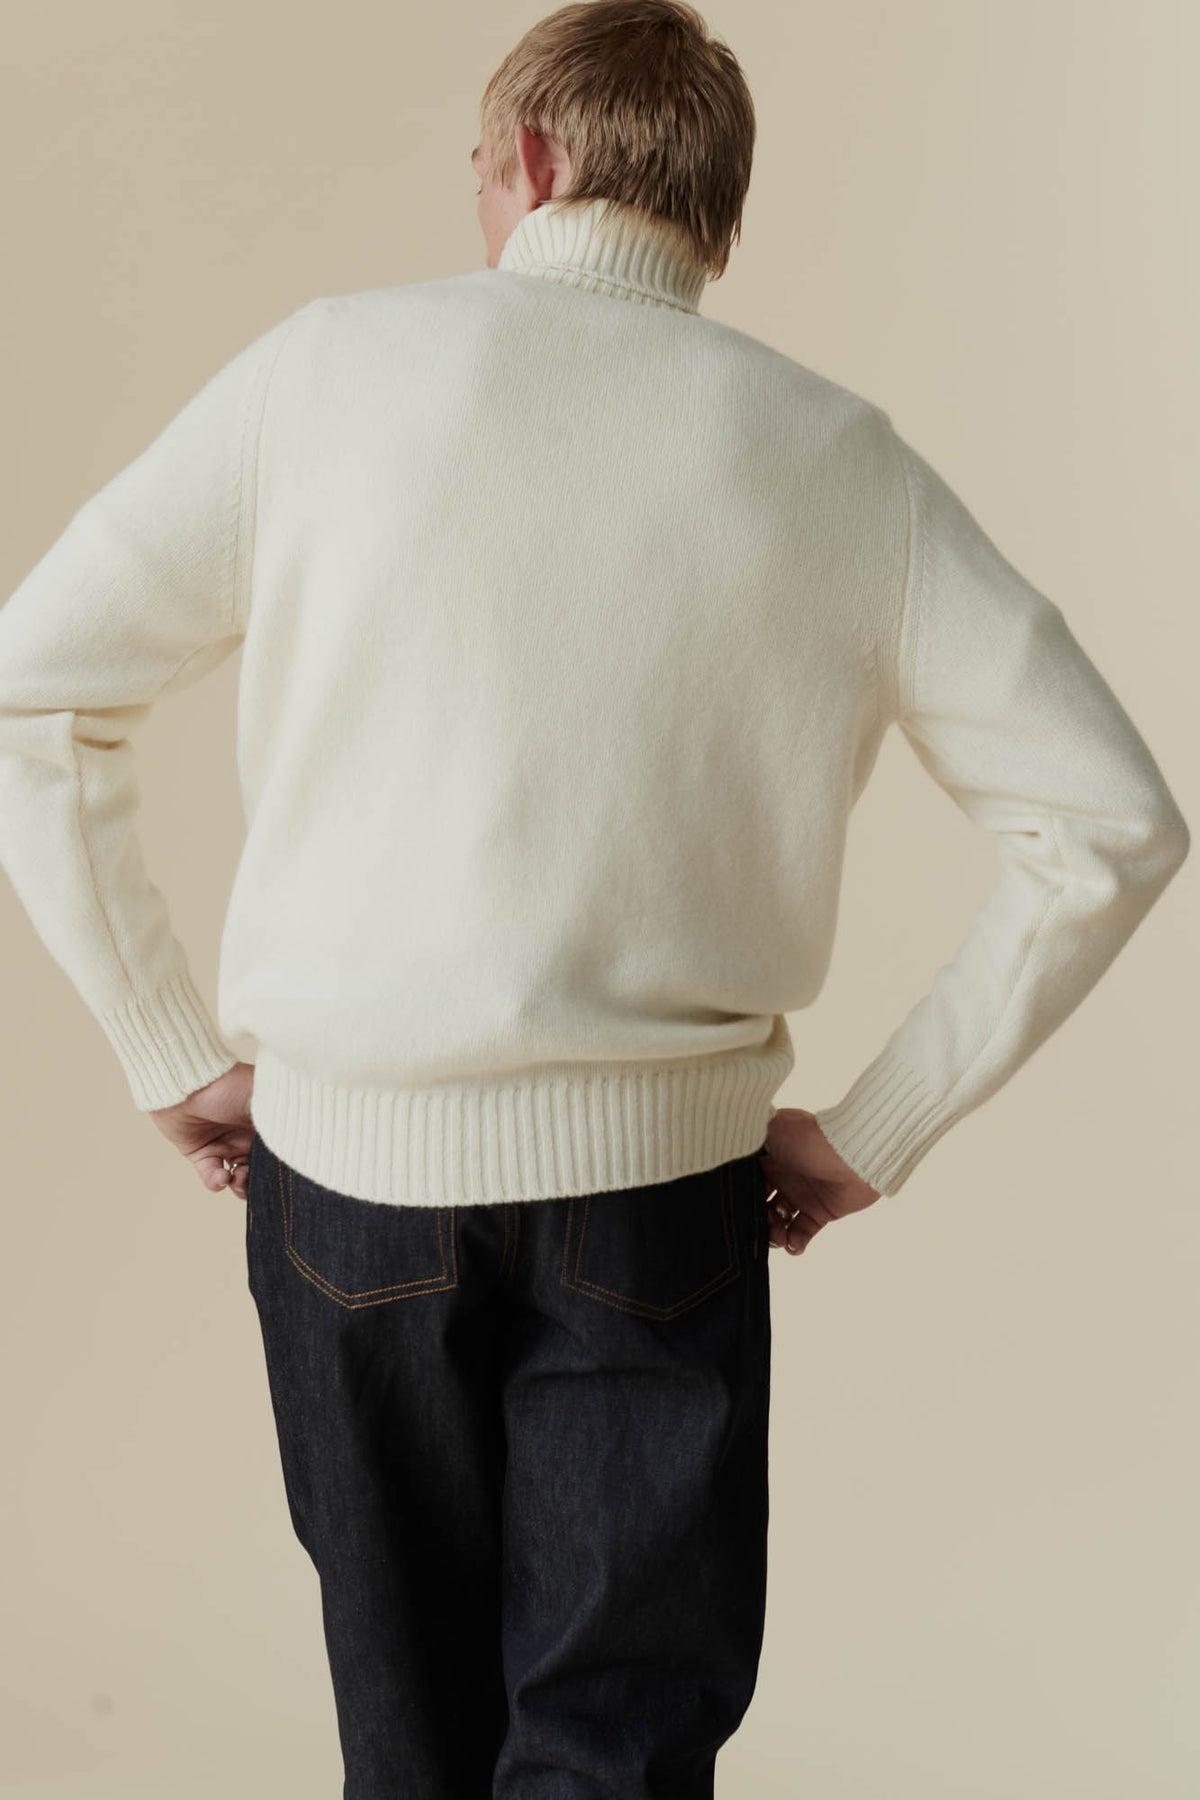 
            Thigh up shot of white male from behind, wearing lambswool roll neck in ecru